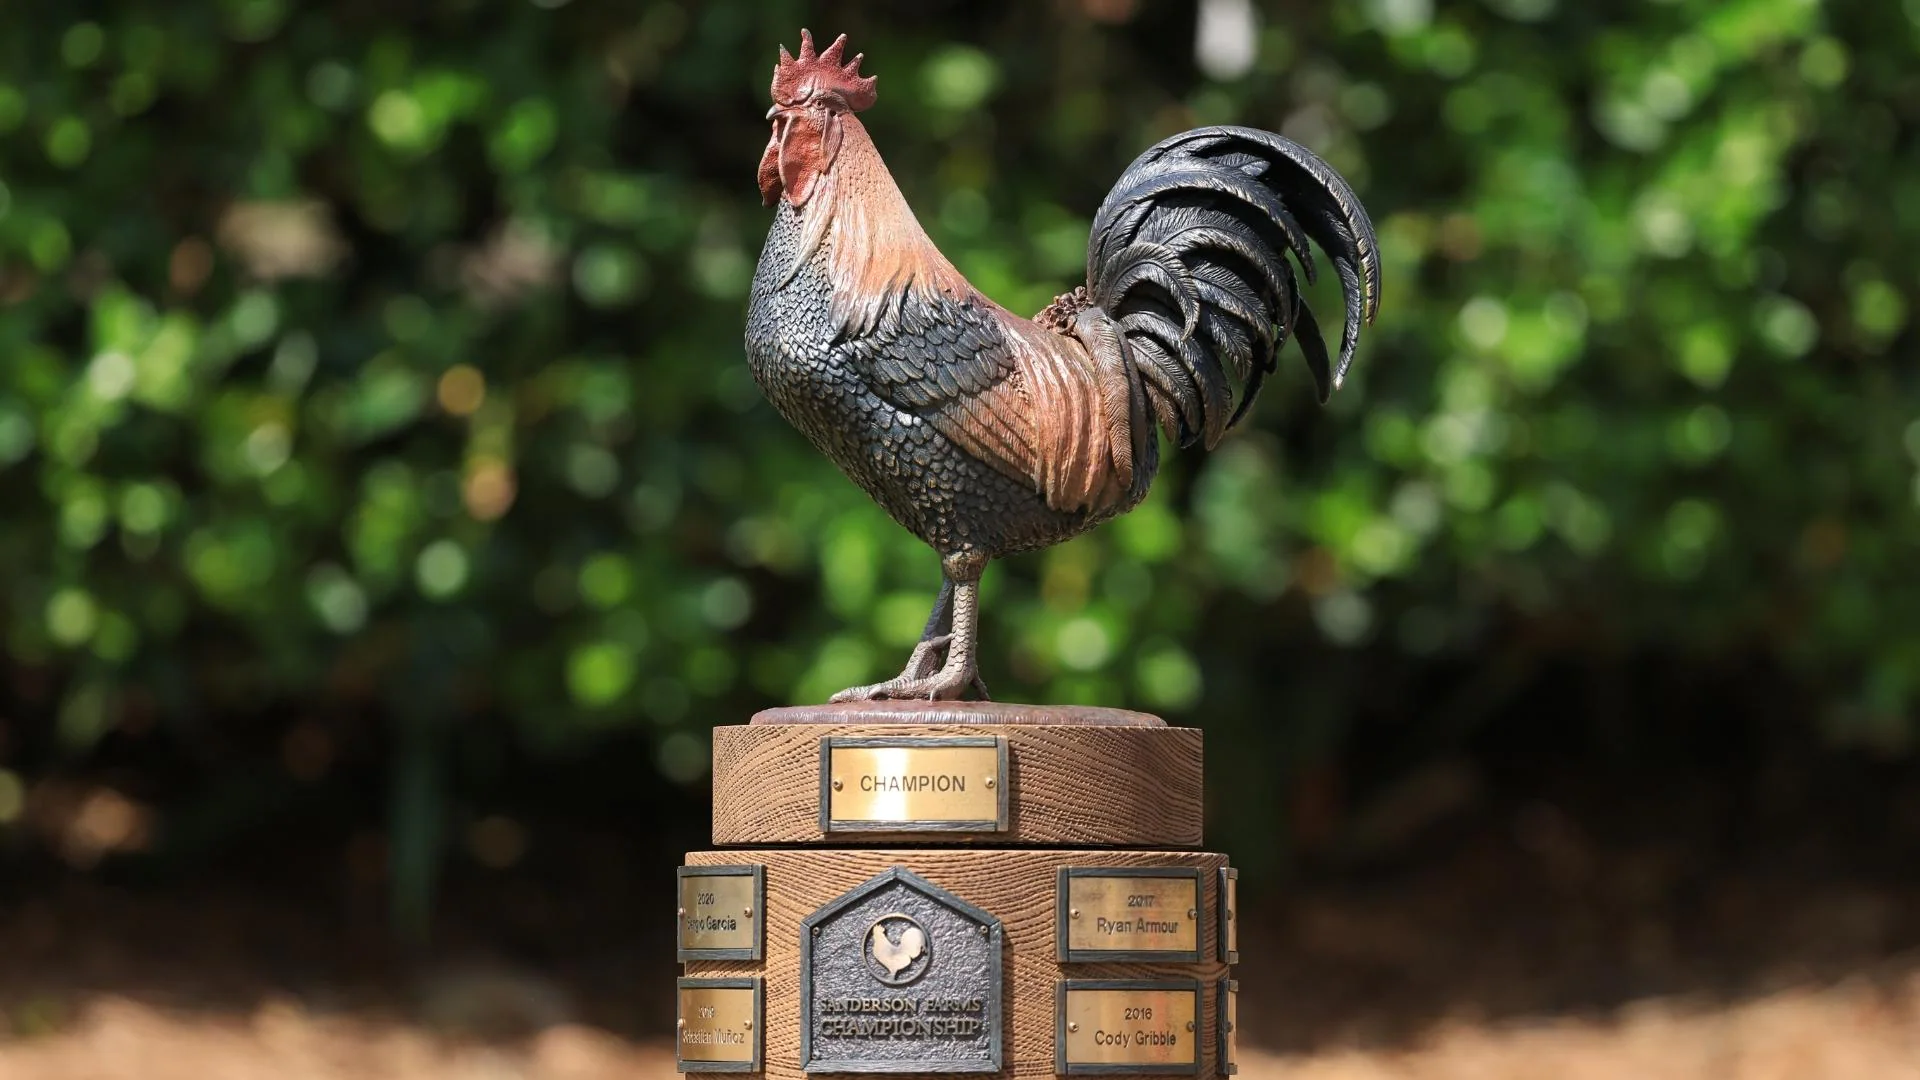 5 things for Sanderson Farms Championship: President Cup players, the story of Reveille the Rooster